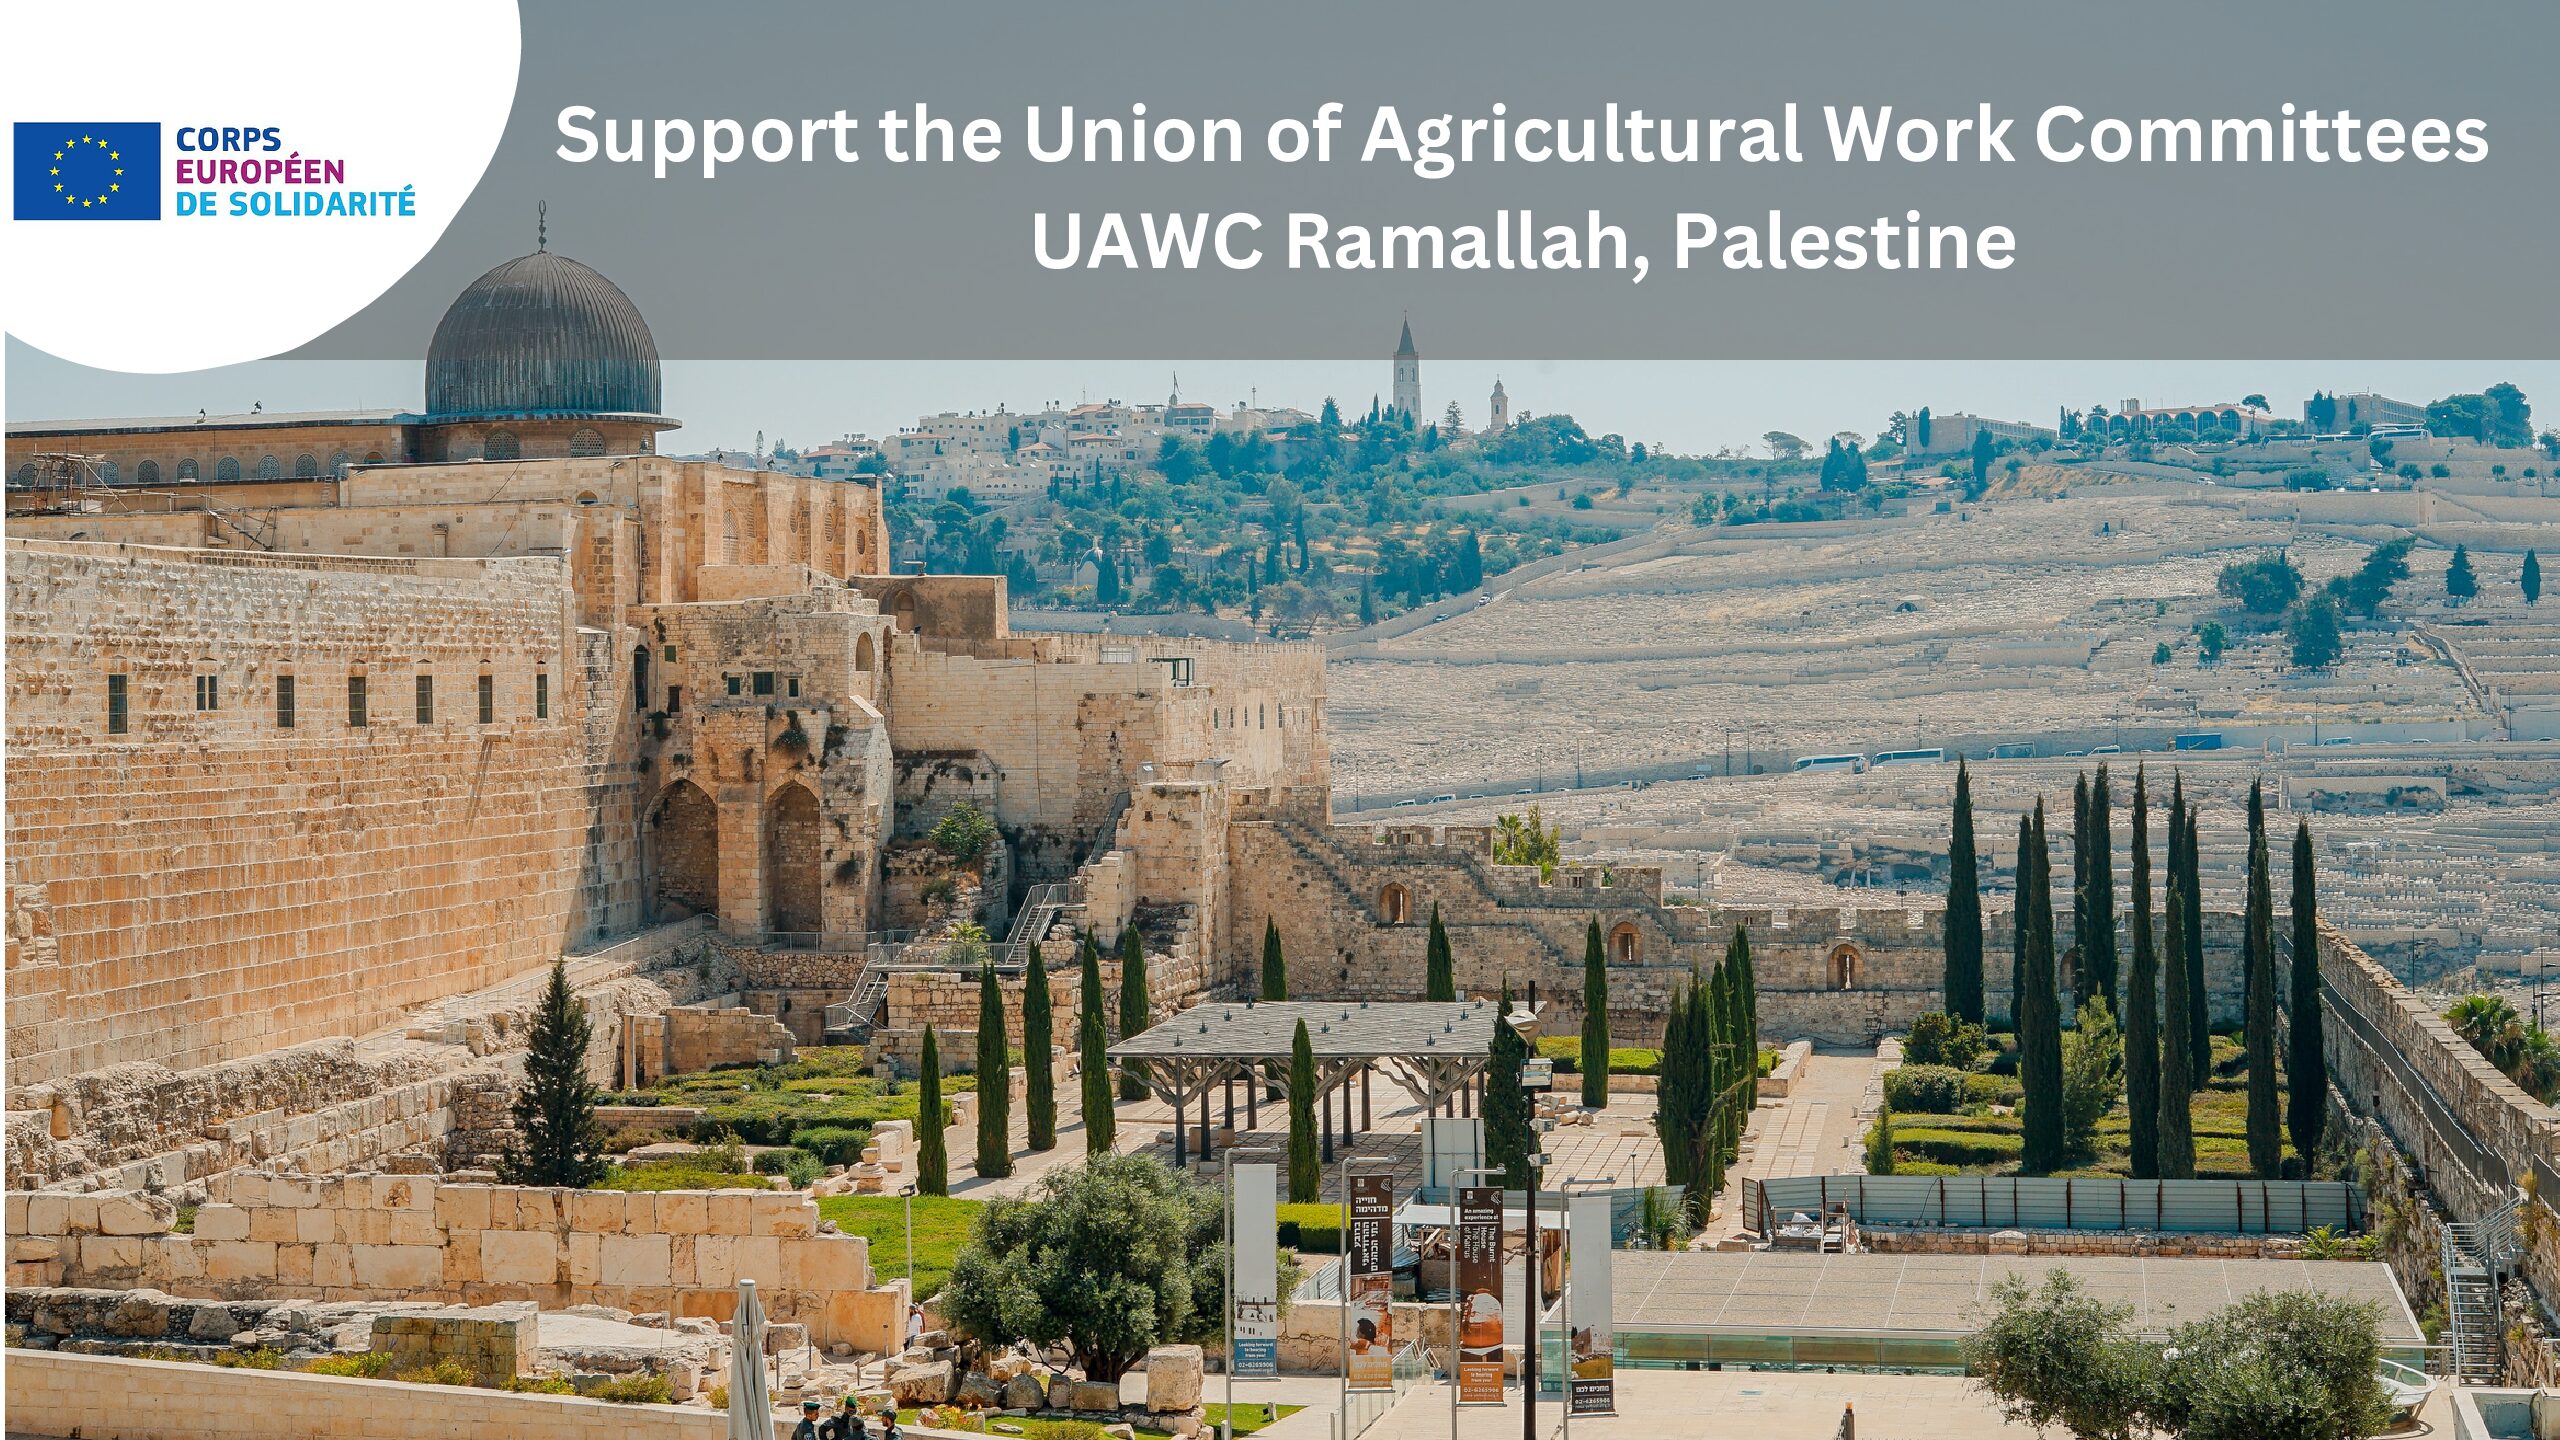 Support the Union of Agricultural Work Committees UAWC Ramallah, Palestine